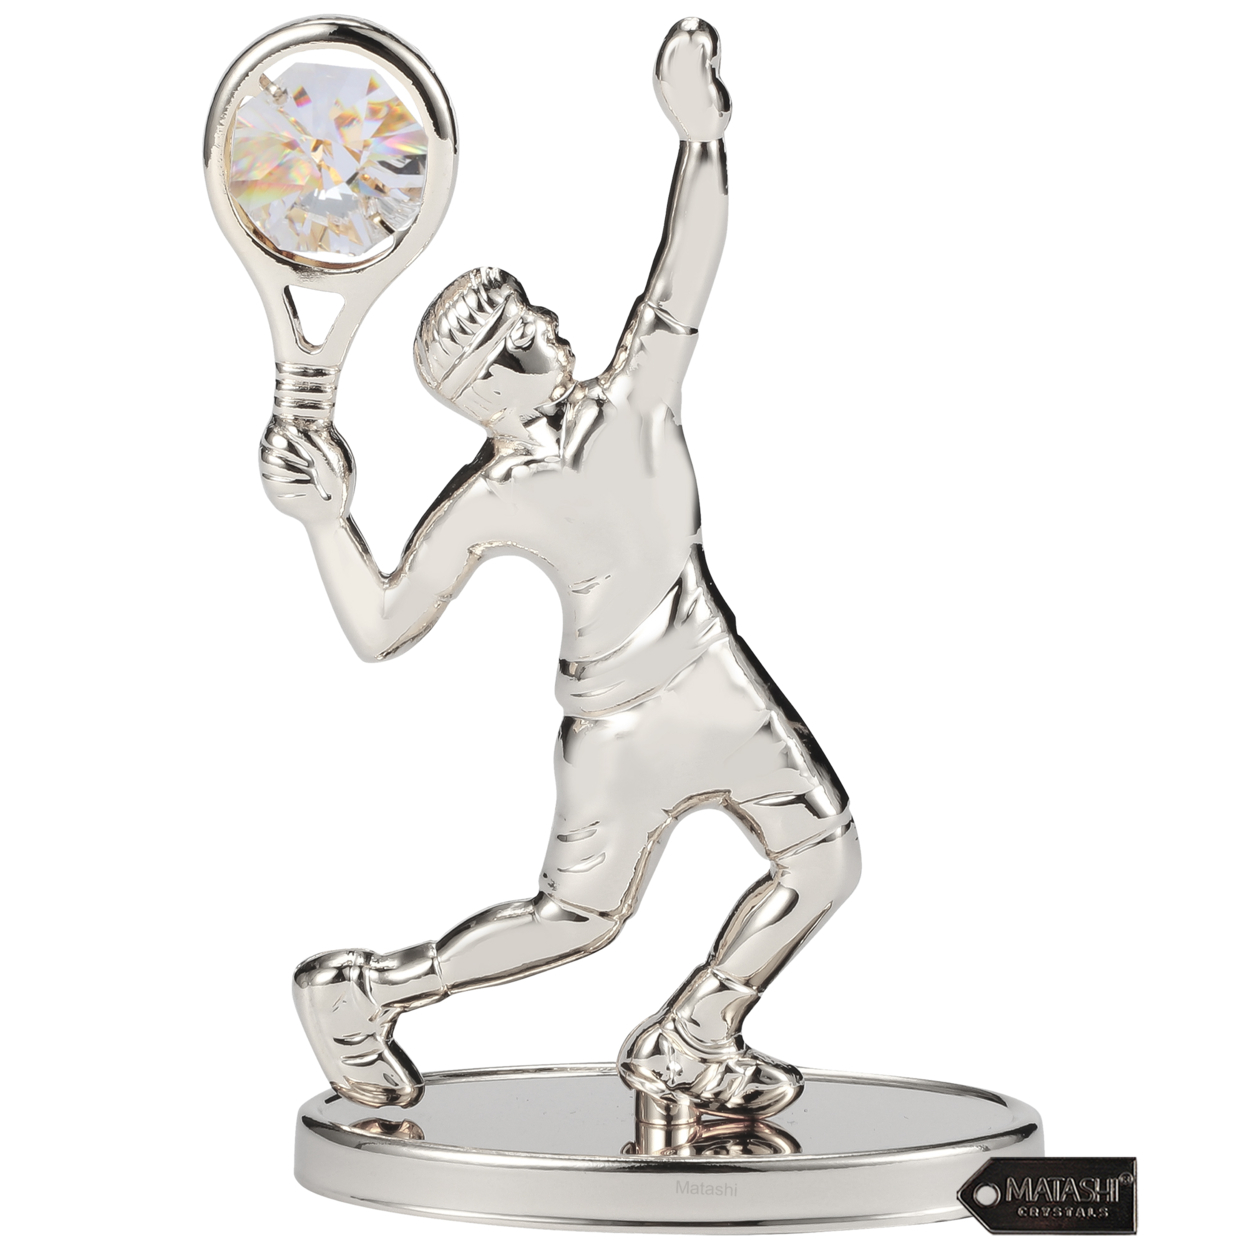 Matashi 24K Gold/Silver Plated Tennis Player Figurine With Crystals, Gift For Sports Fan Birthday Desk Accessories Trophy Boss Gift - Silver